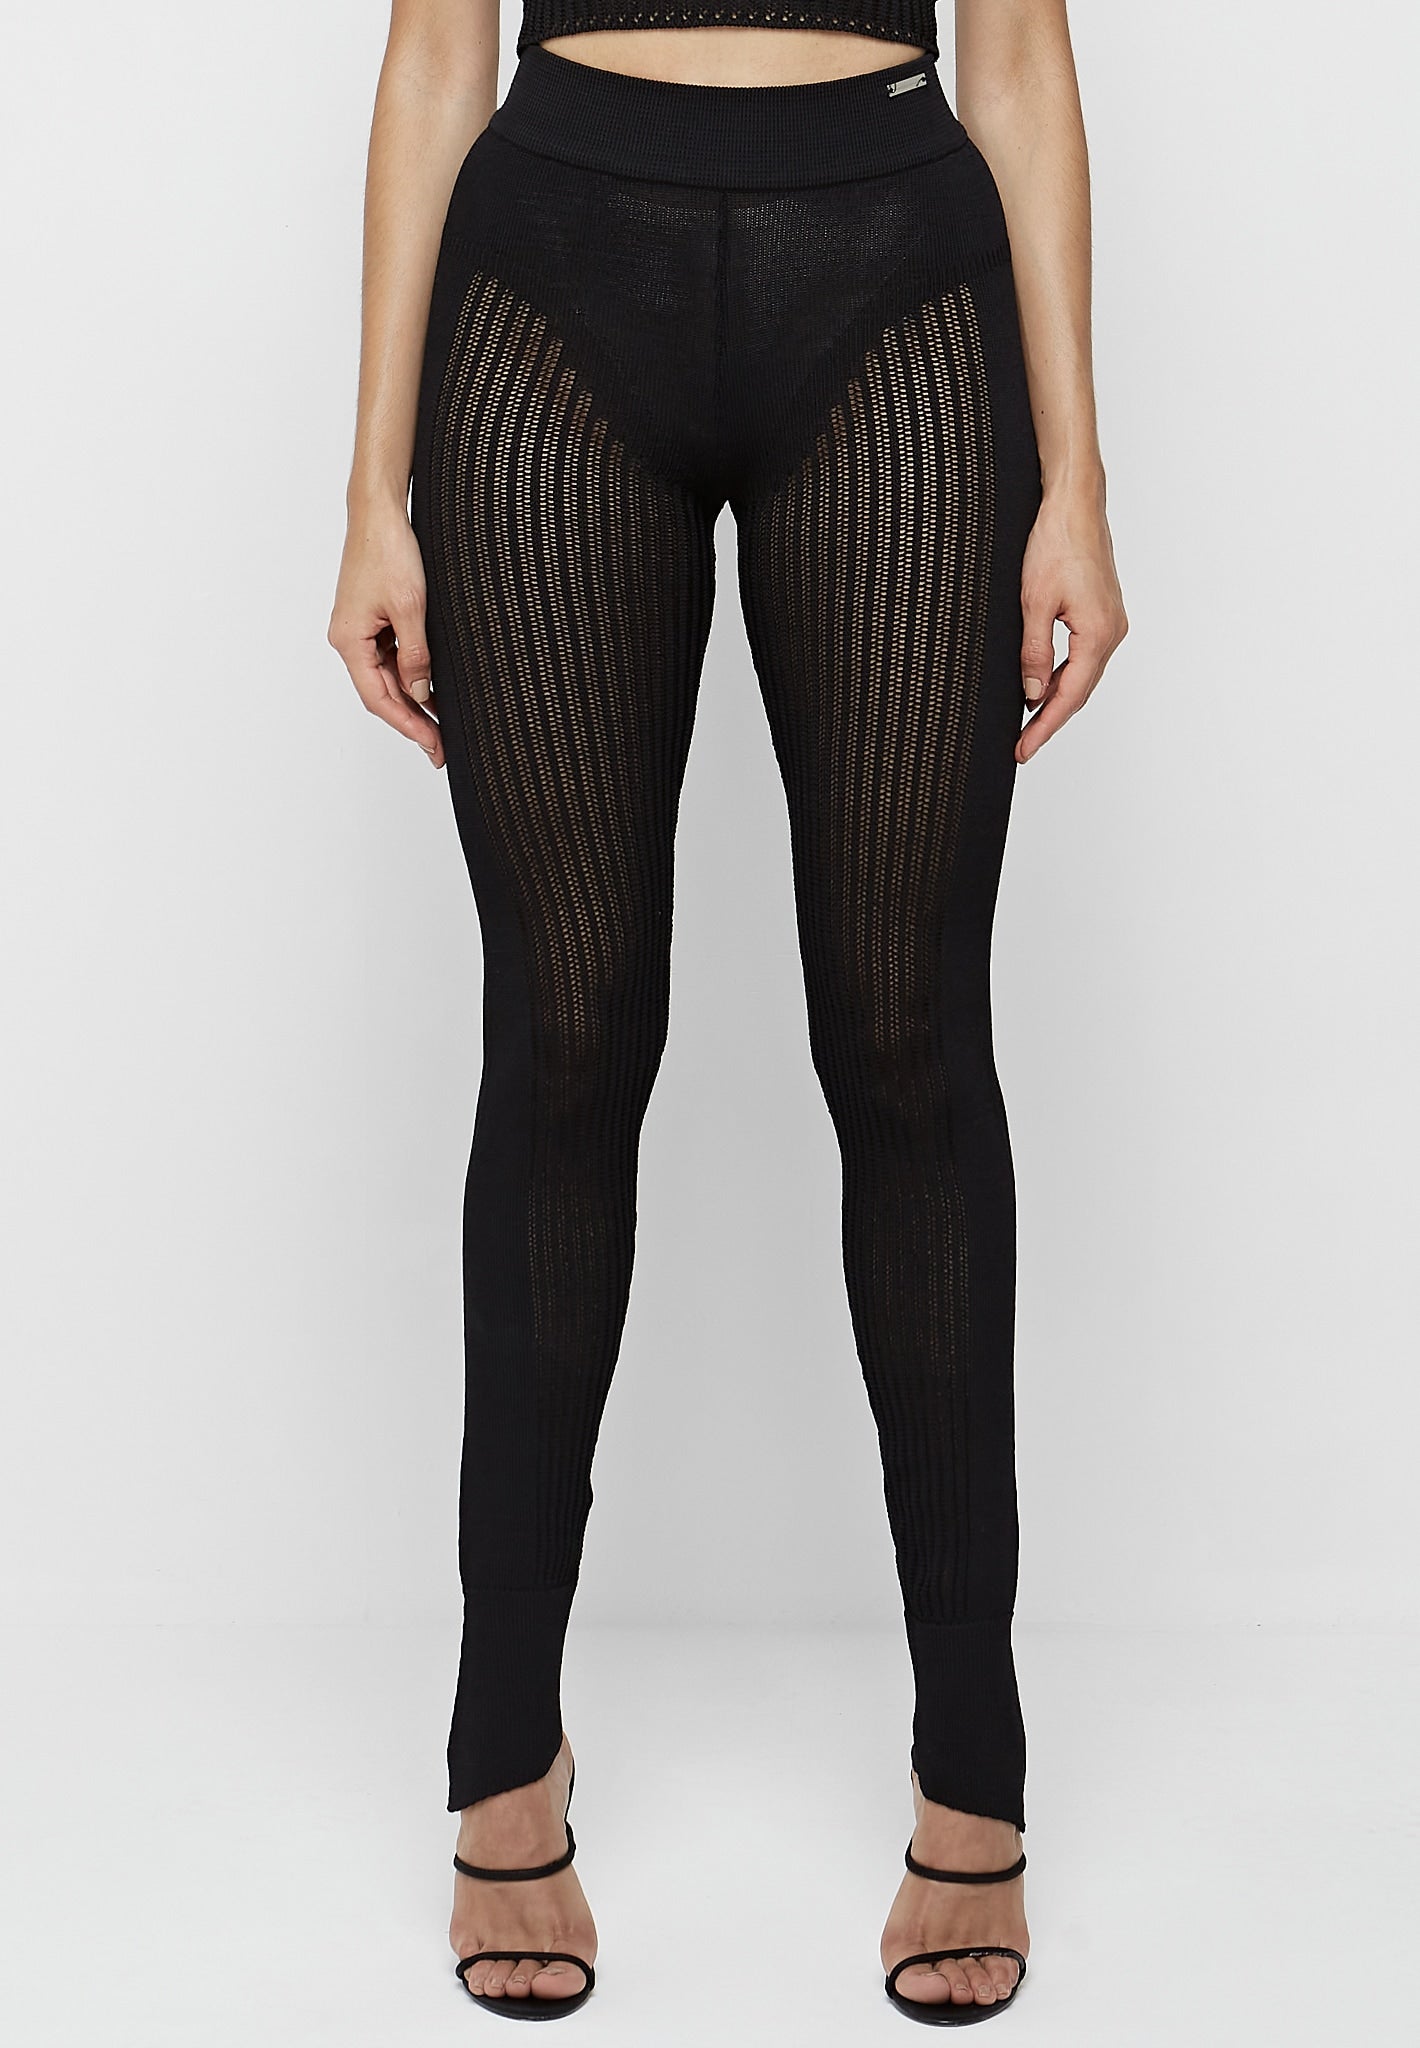 Buy Black knitted fabric leggings with strips: leggings, black color,  knitted fabric, casual style, buy in VOVK online store for 690 UAH.